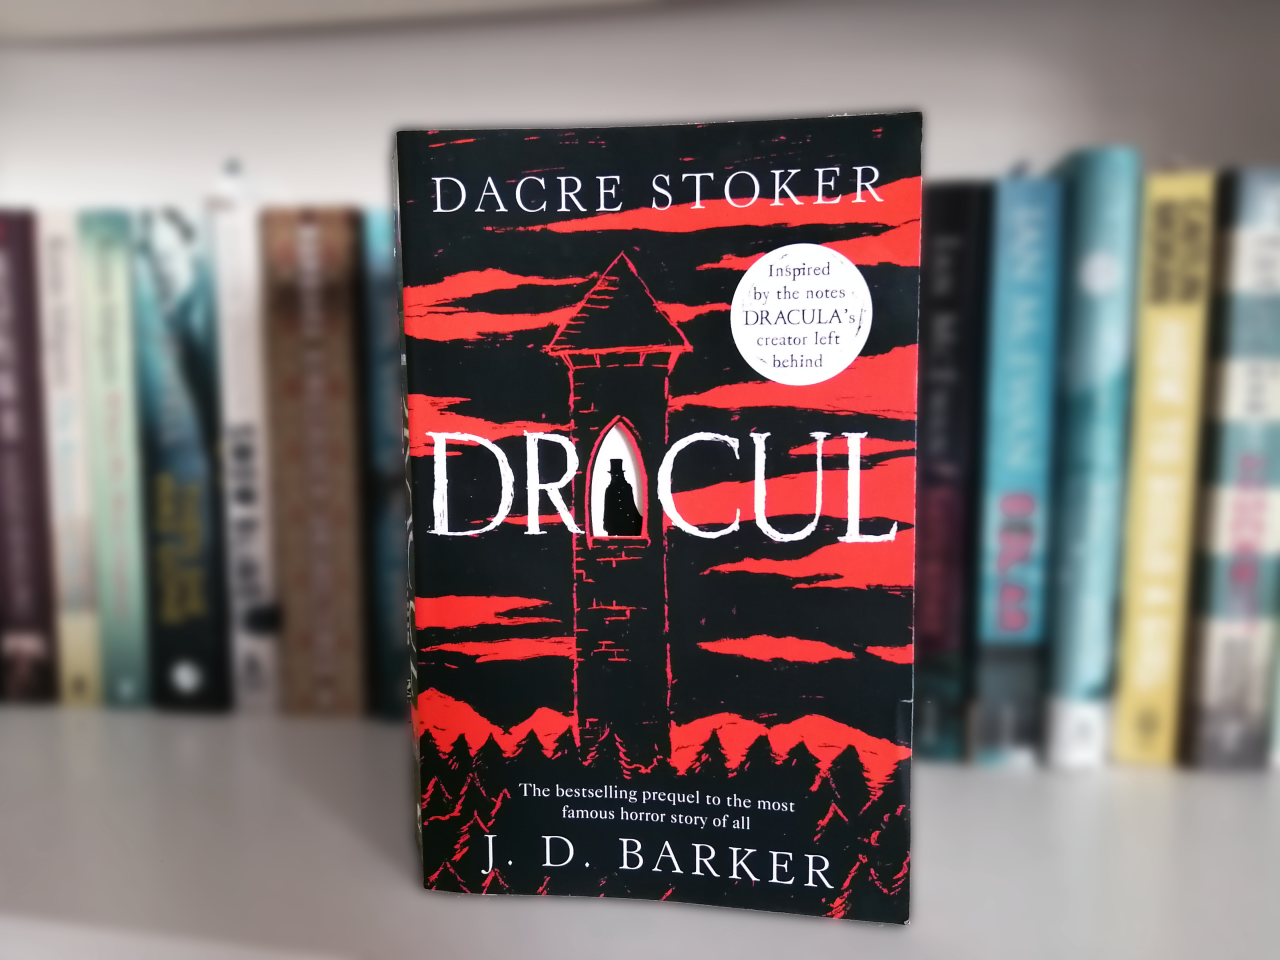 Dracula by Dacre Stoker